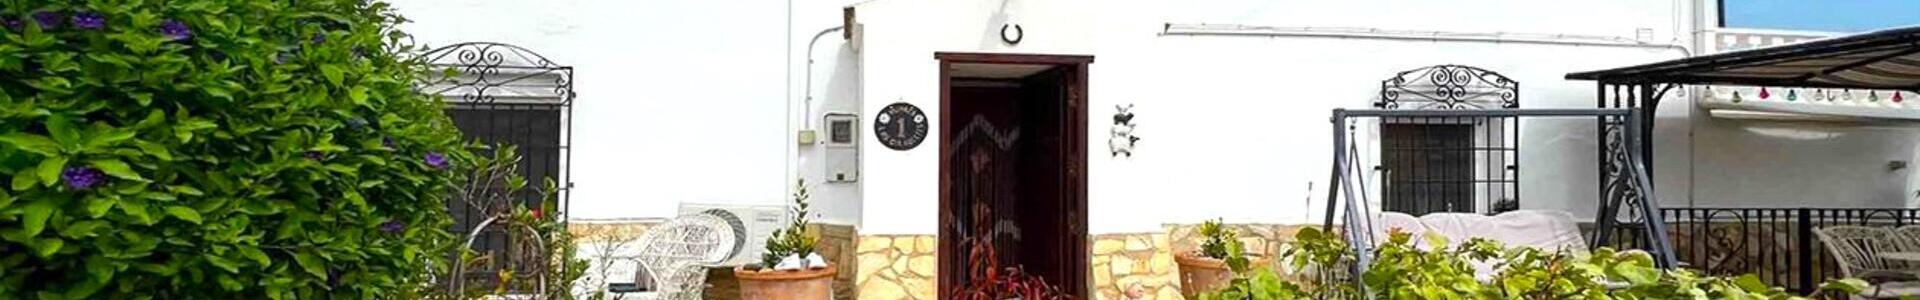 130-1427: 4 Bedroom Cortijo: Traditional Cottage for Sale